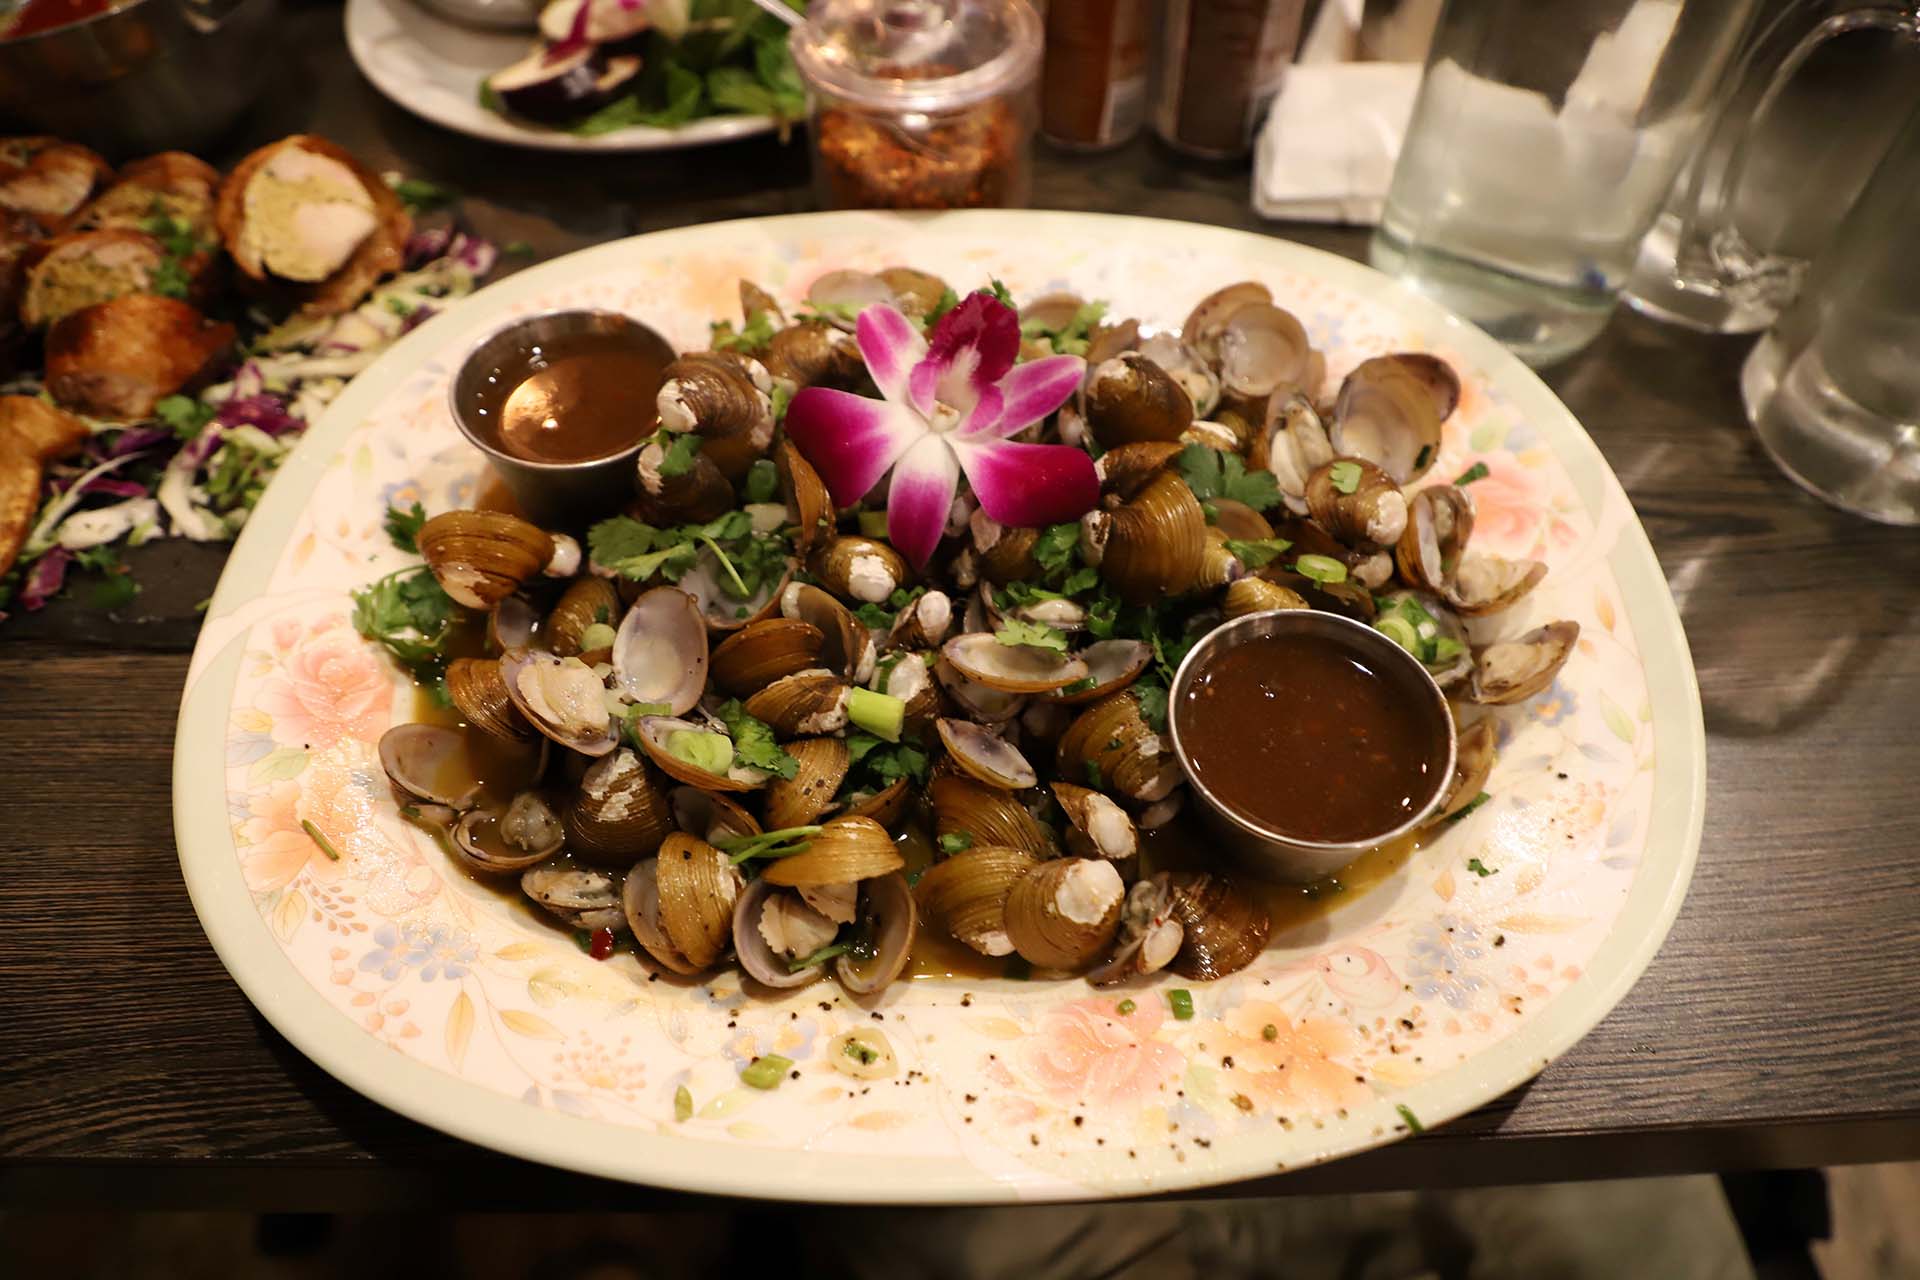 A plate of small freshwater clams topped with a decorative purple orchid blossom.